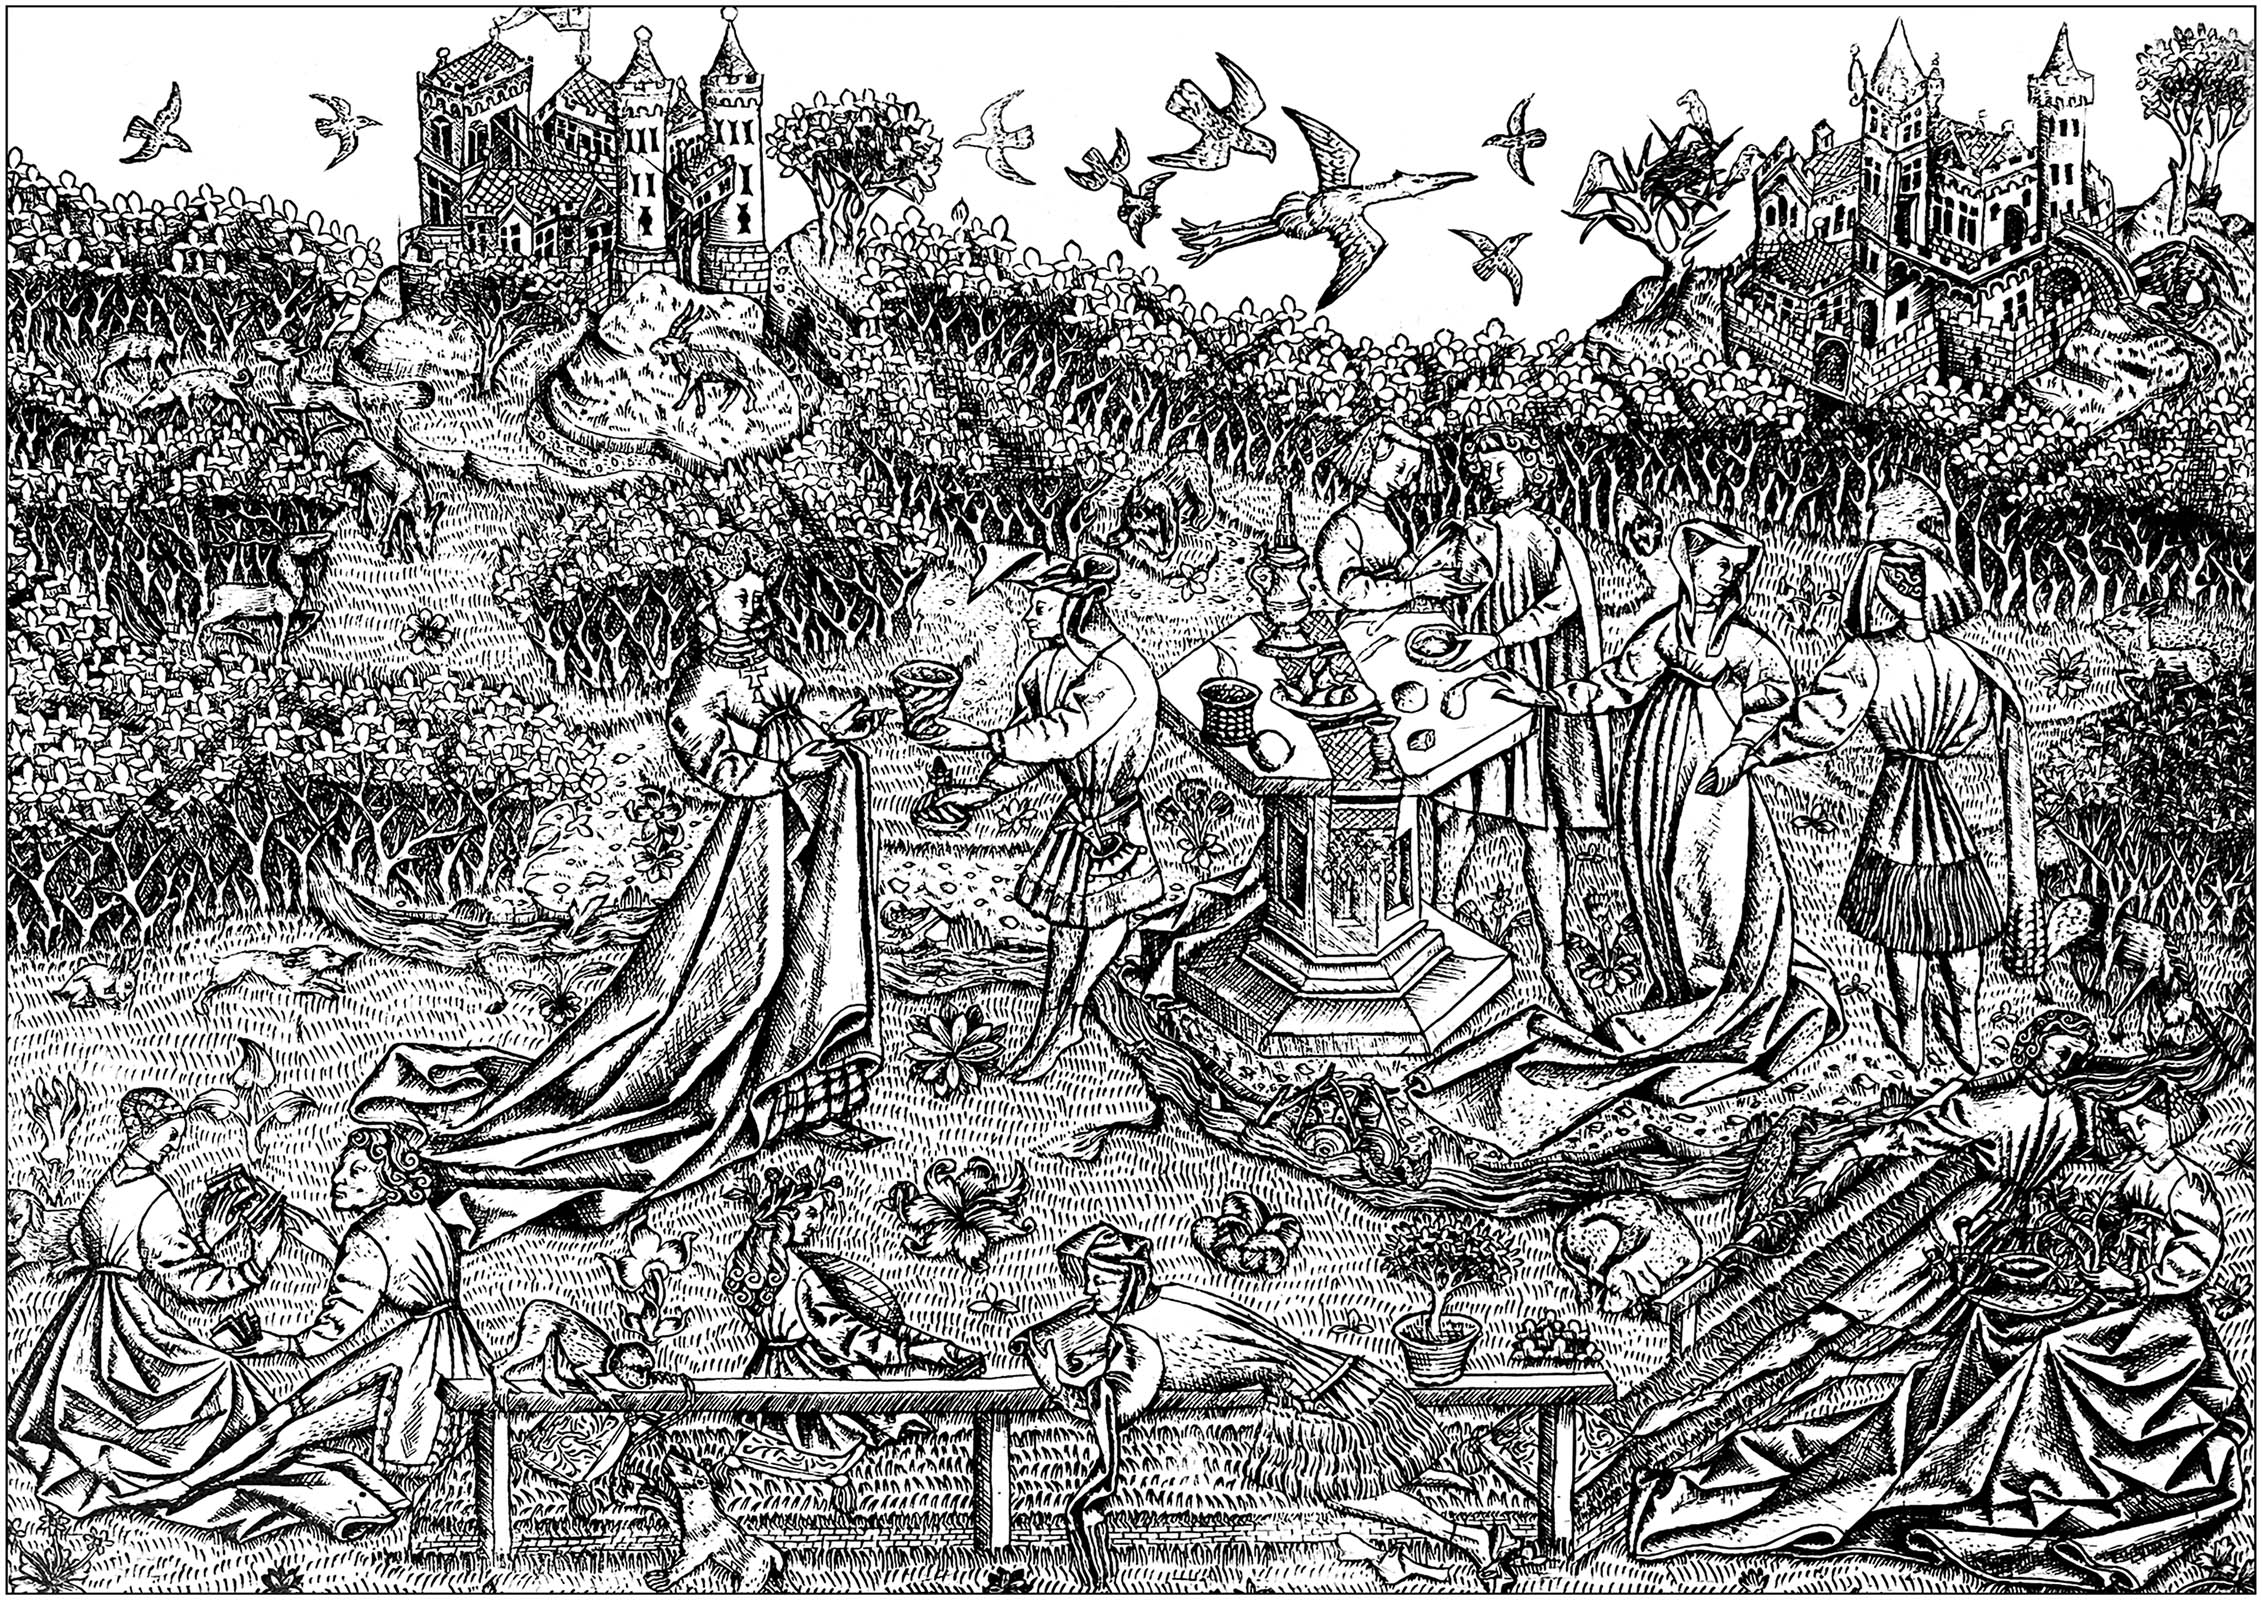 Engraving 'Master of the Gardens of Love (The Great Garden of Love)' by Jérôme Bosch (circa 1450)!. This engraving can be seen in Berlin, at the Staatliche Museen. It's virtually the original drawing that you can color in: nothing has been altered, except for a few traces in the sky.